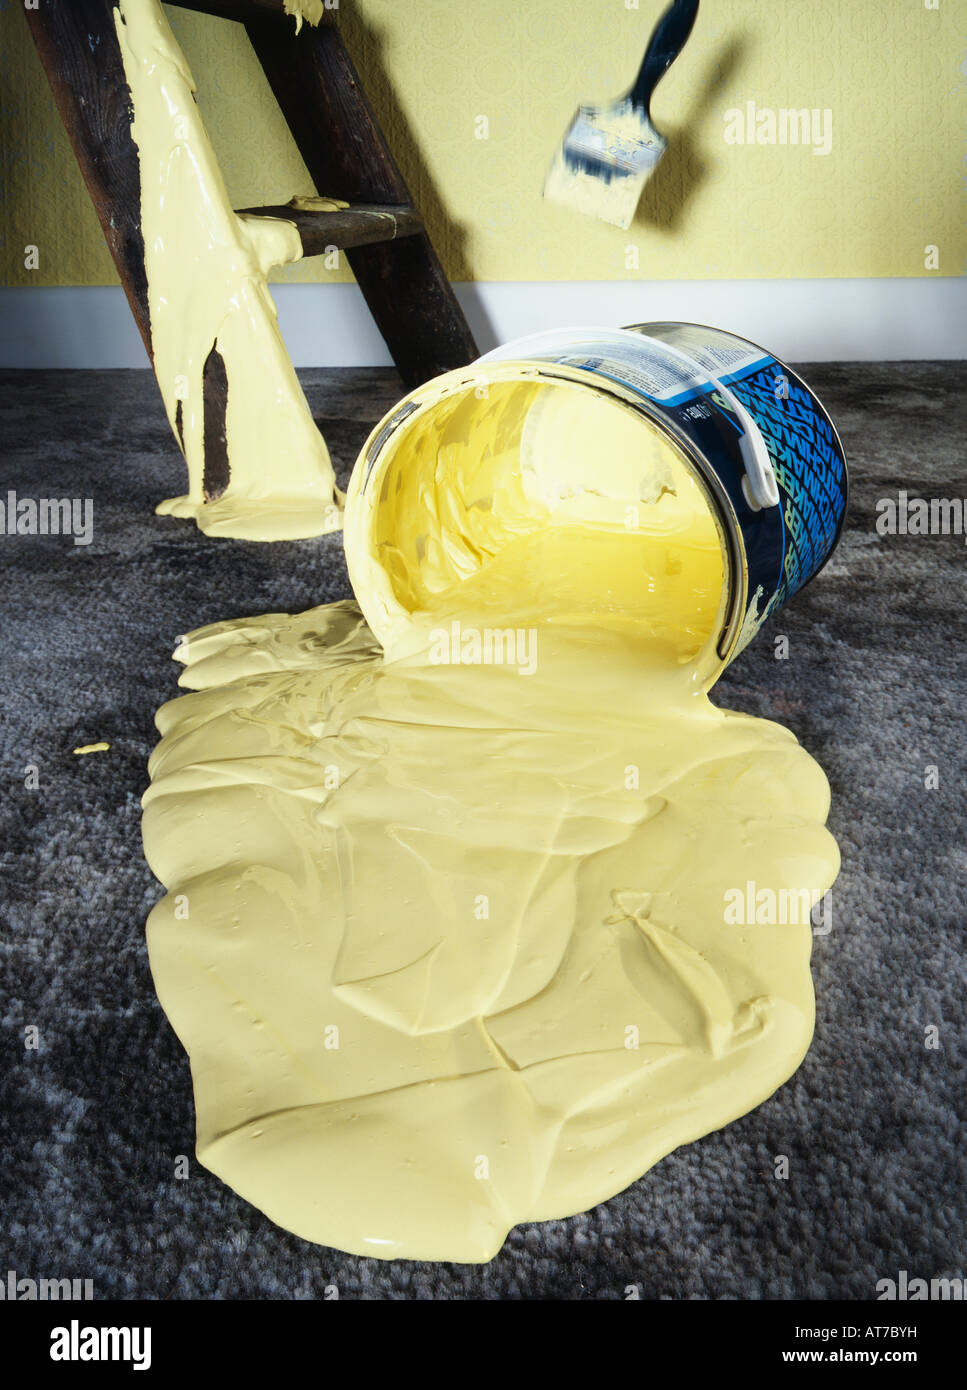 Paint Can - Yellow - Spilled